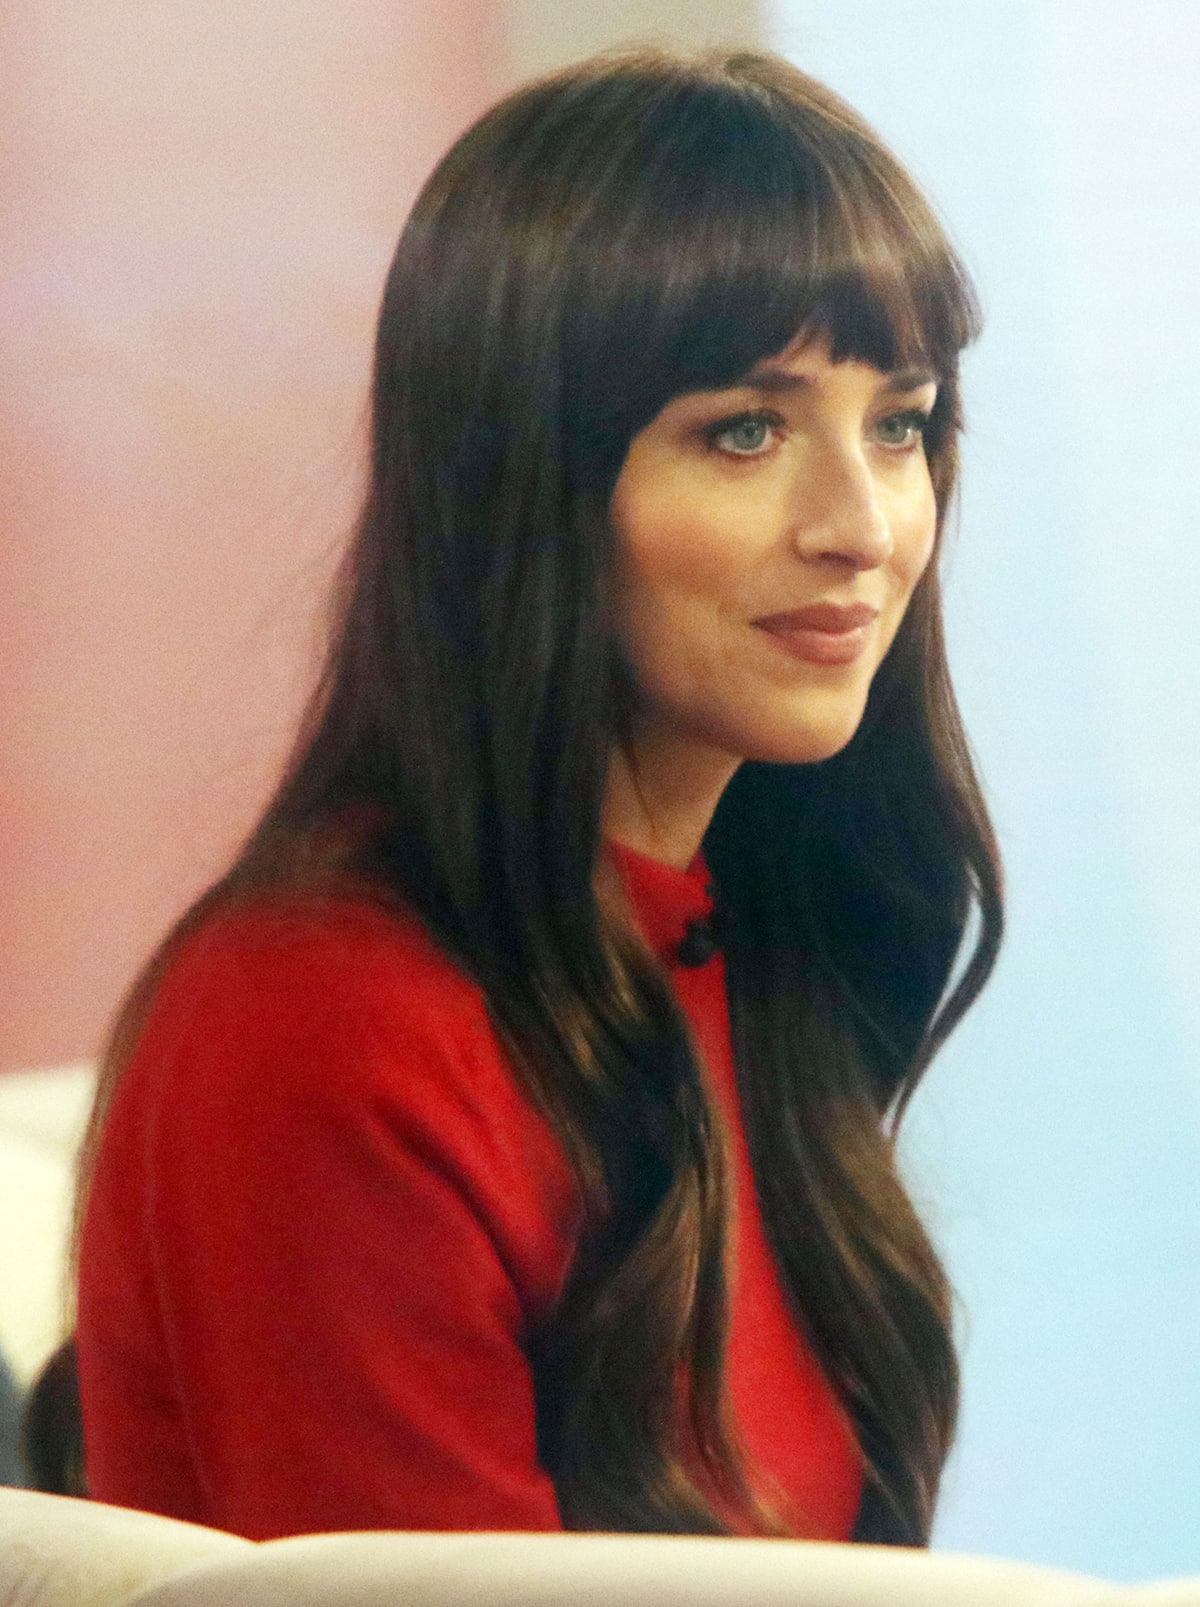 Dakota Johnson wears her signature bangs and completes her look with mascara and rosy makeup